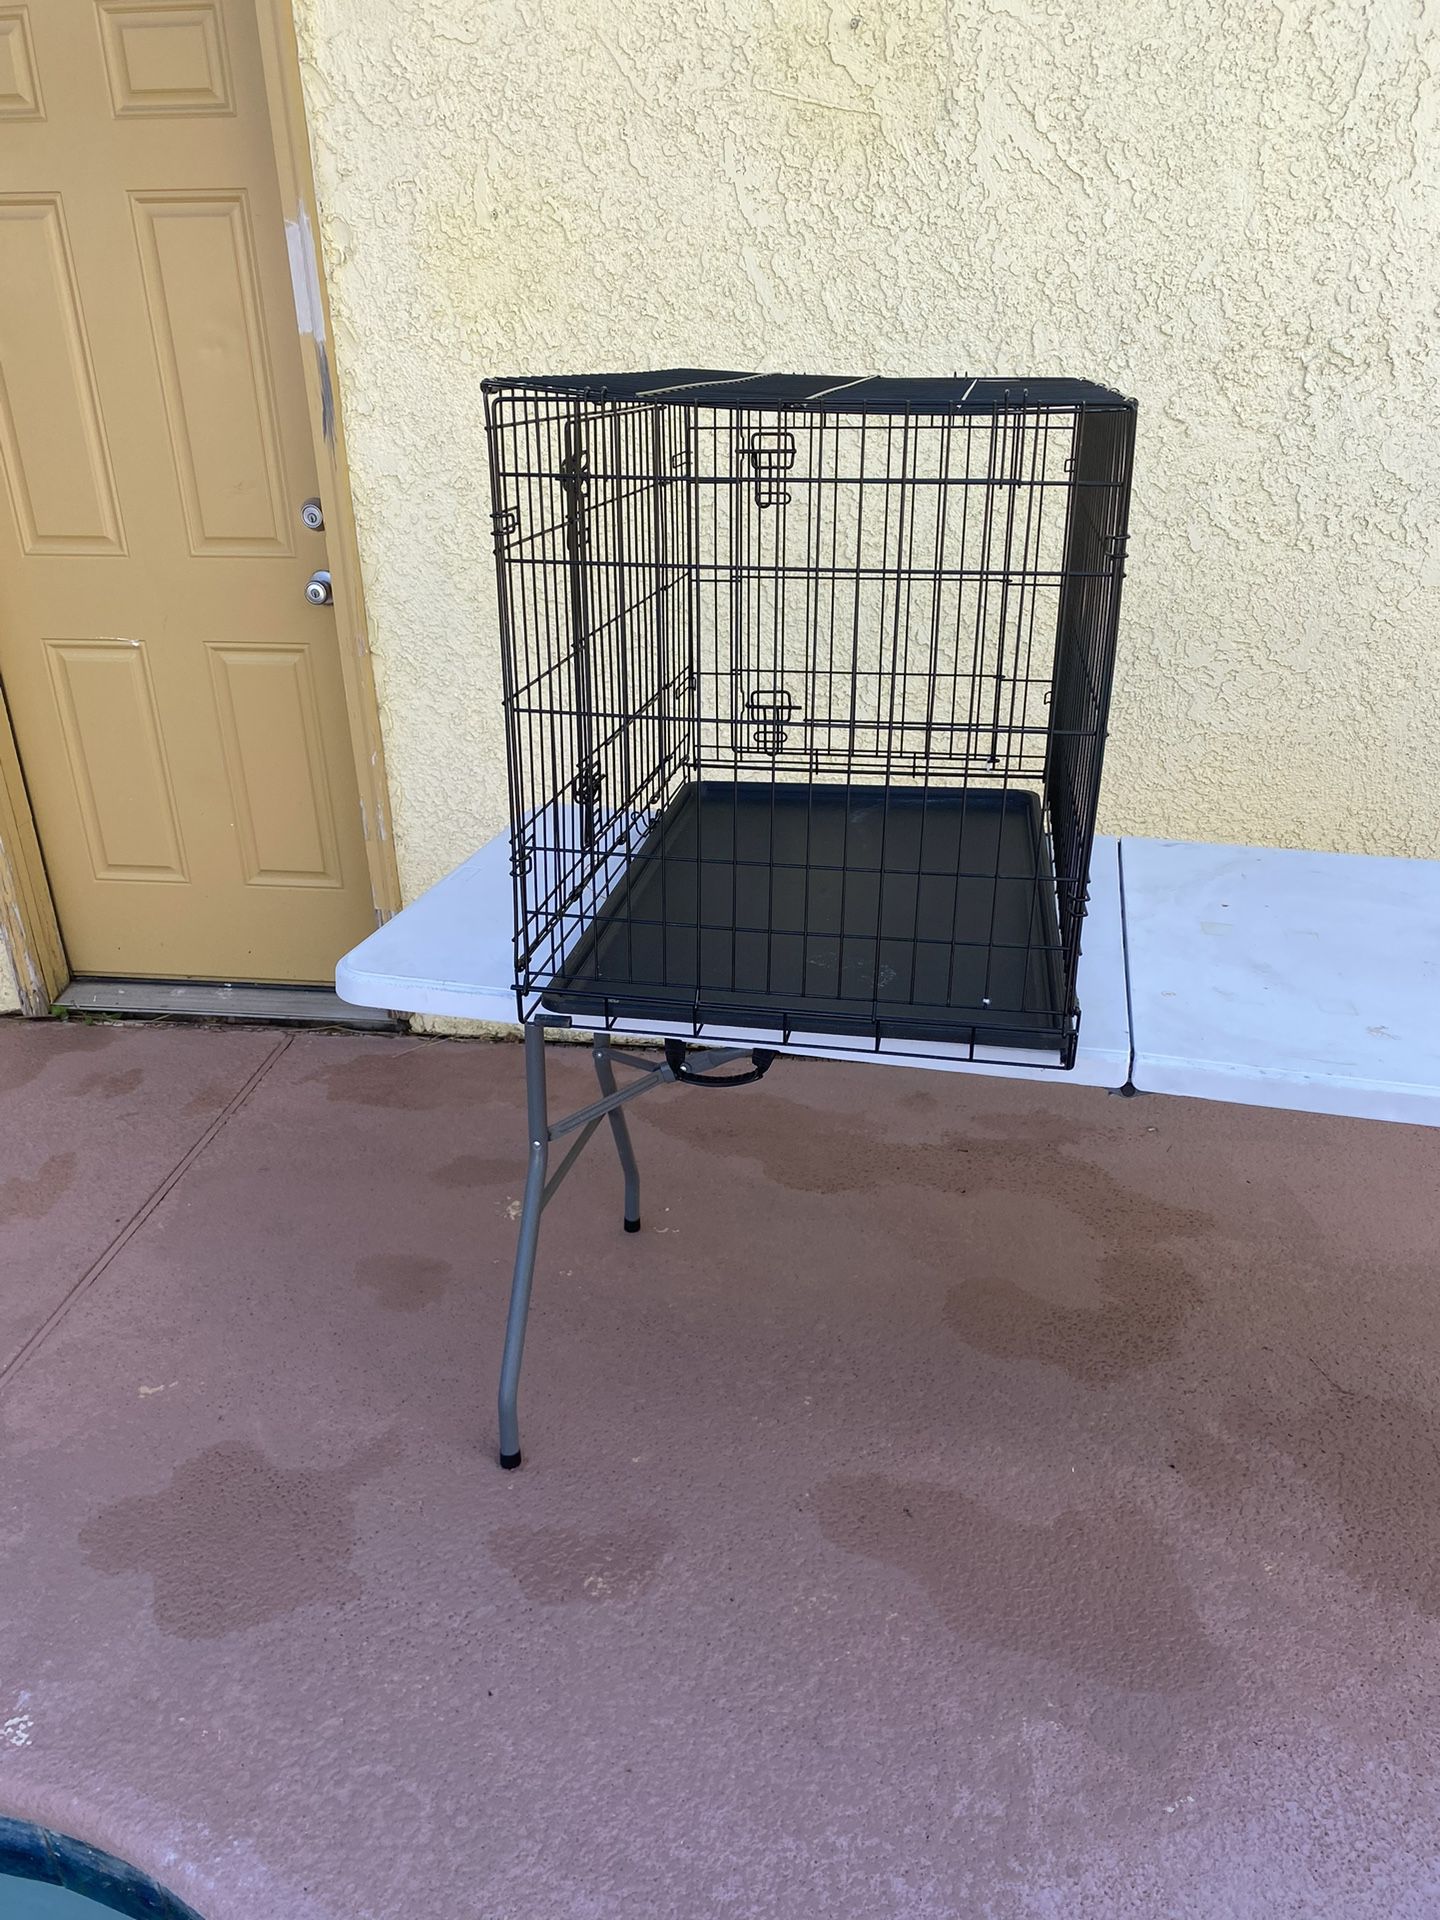 3 DOG KENNELS EXCELLENT CONDITION SELLING ALL 3 KENNELS FOR $180 TAKE ALL ! XL IN SIZE MEASUREMENTS WITH PHOTOS. IF YOU WANT JUST 1 $70 ! THANK YOU ! 